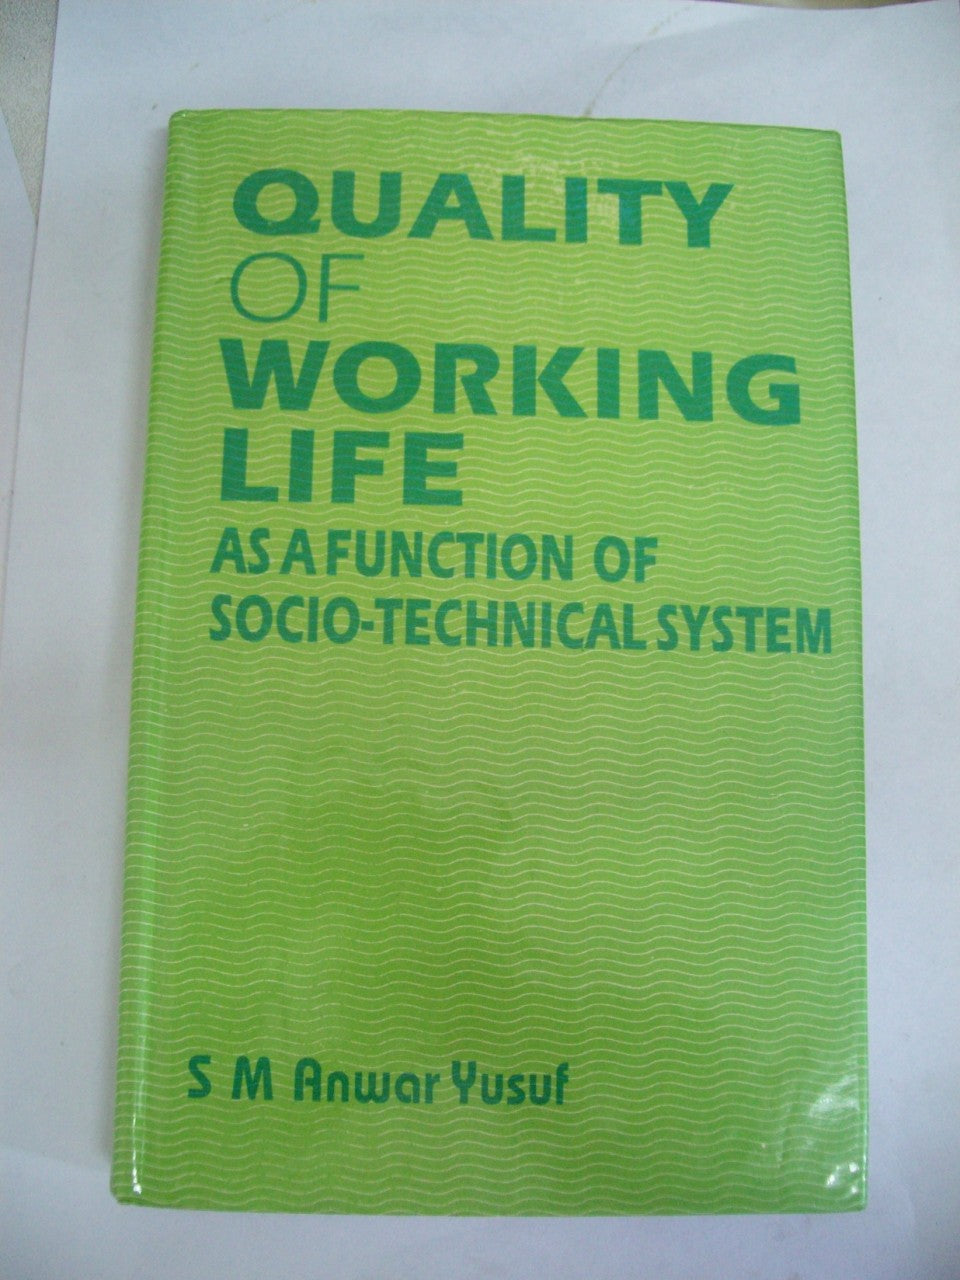 Quality Of Working Life As A Function Of Socio-Technical System